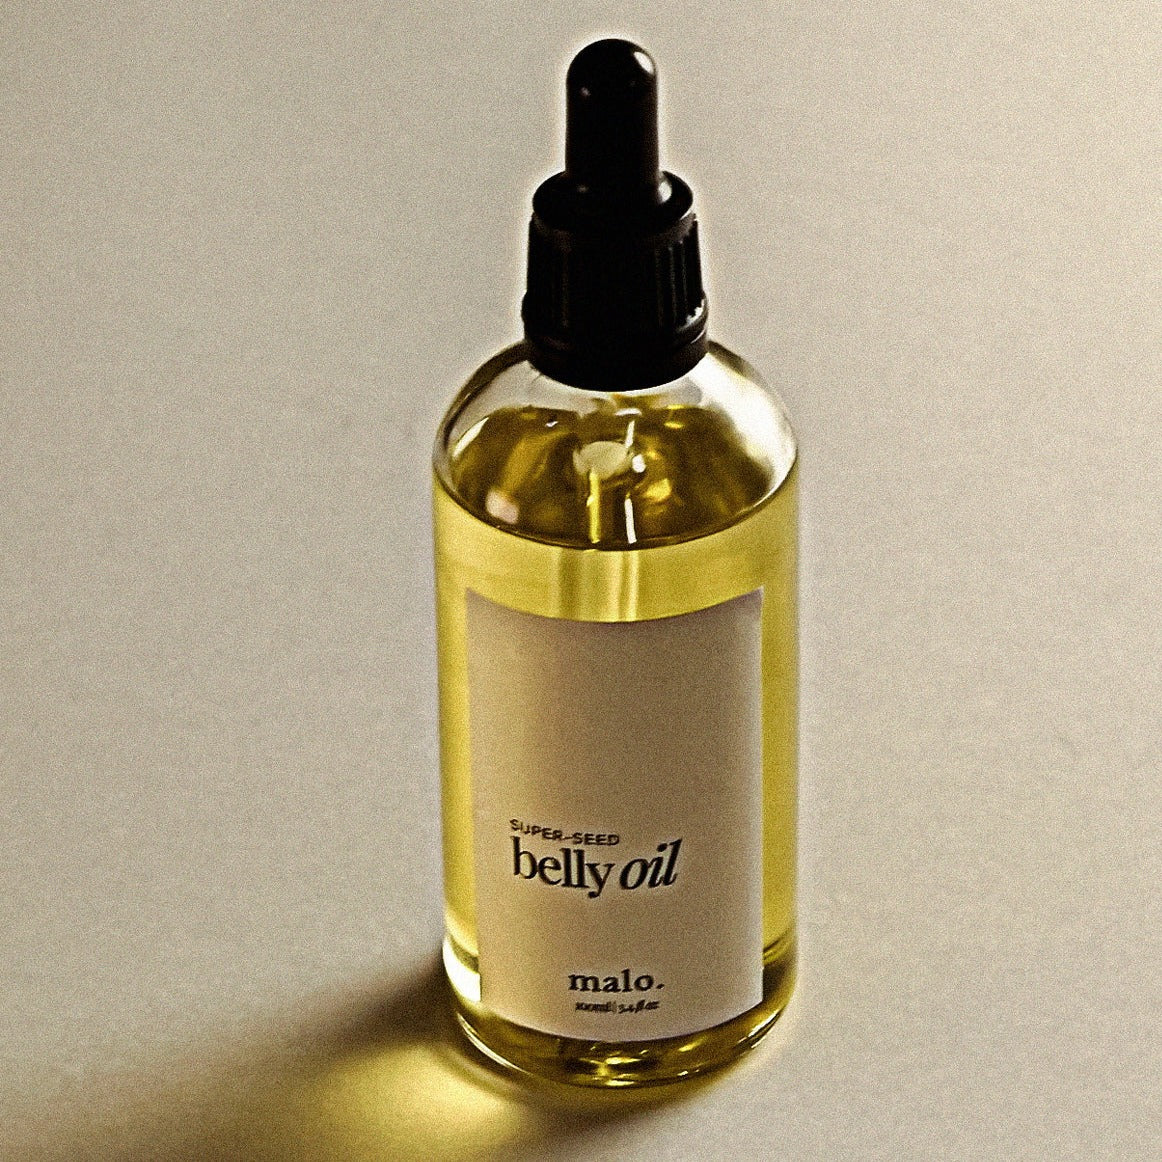 Super-Seed Belly Oil